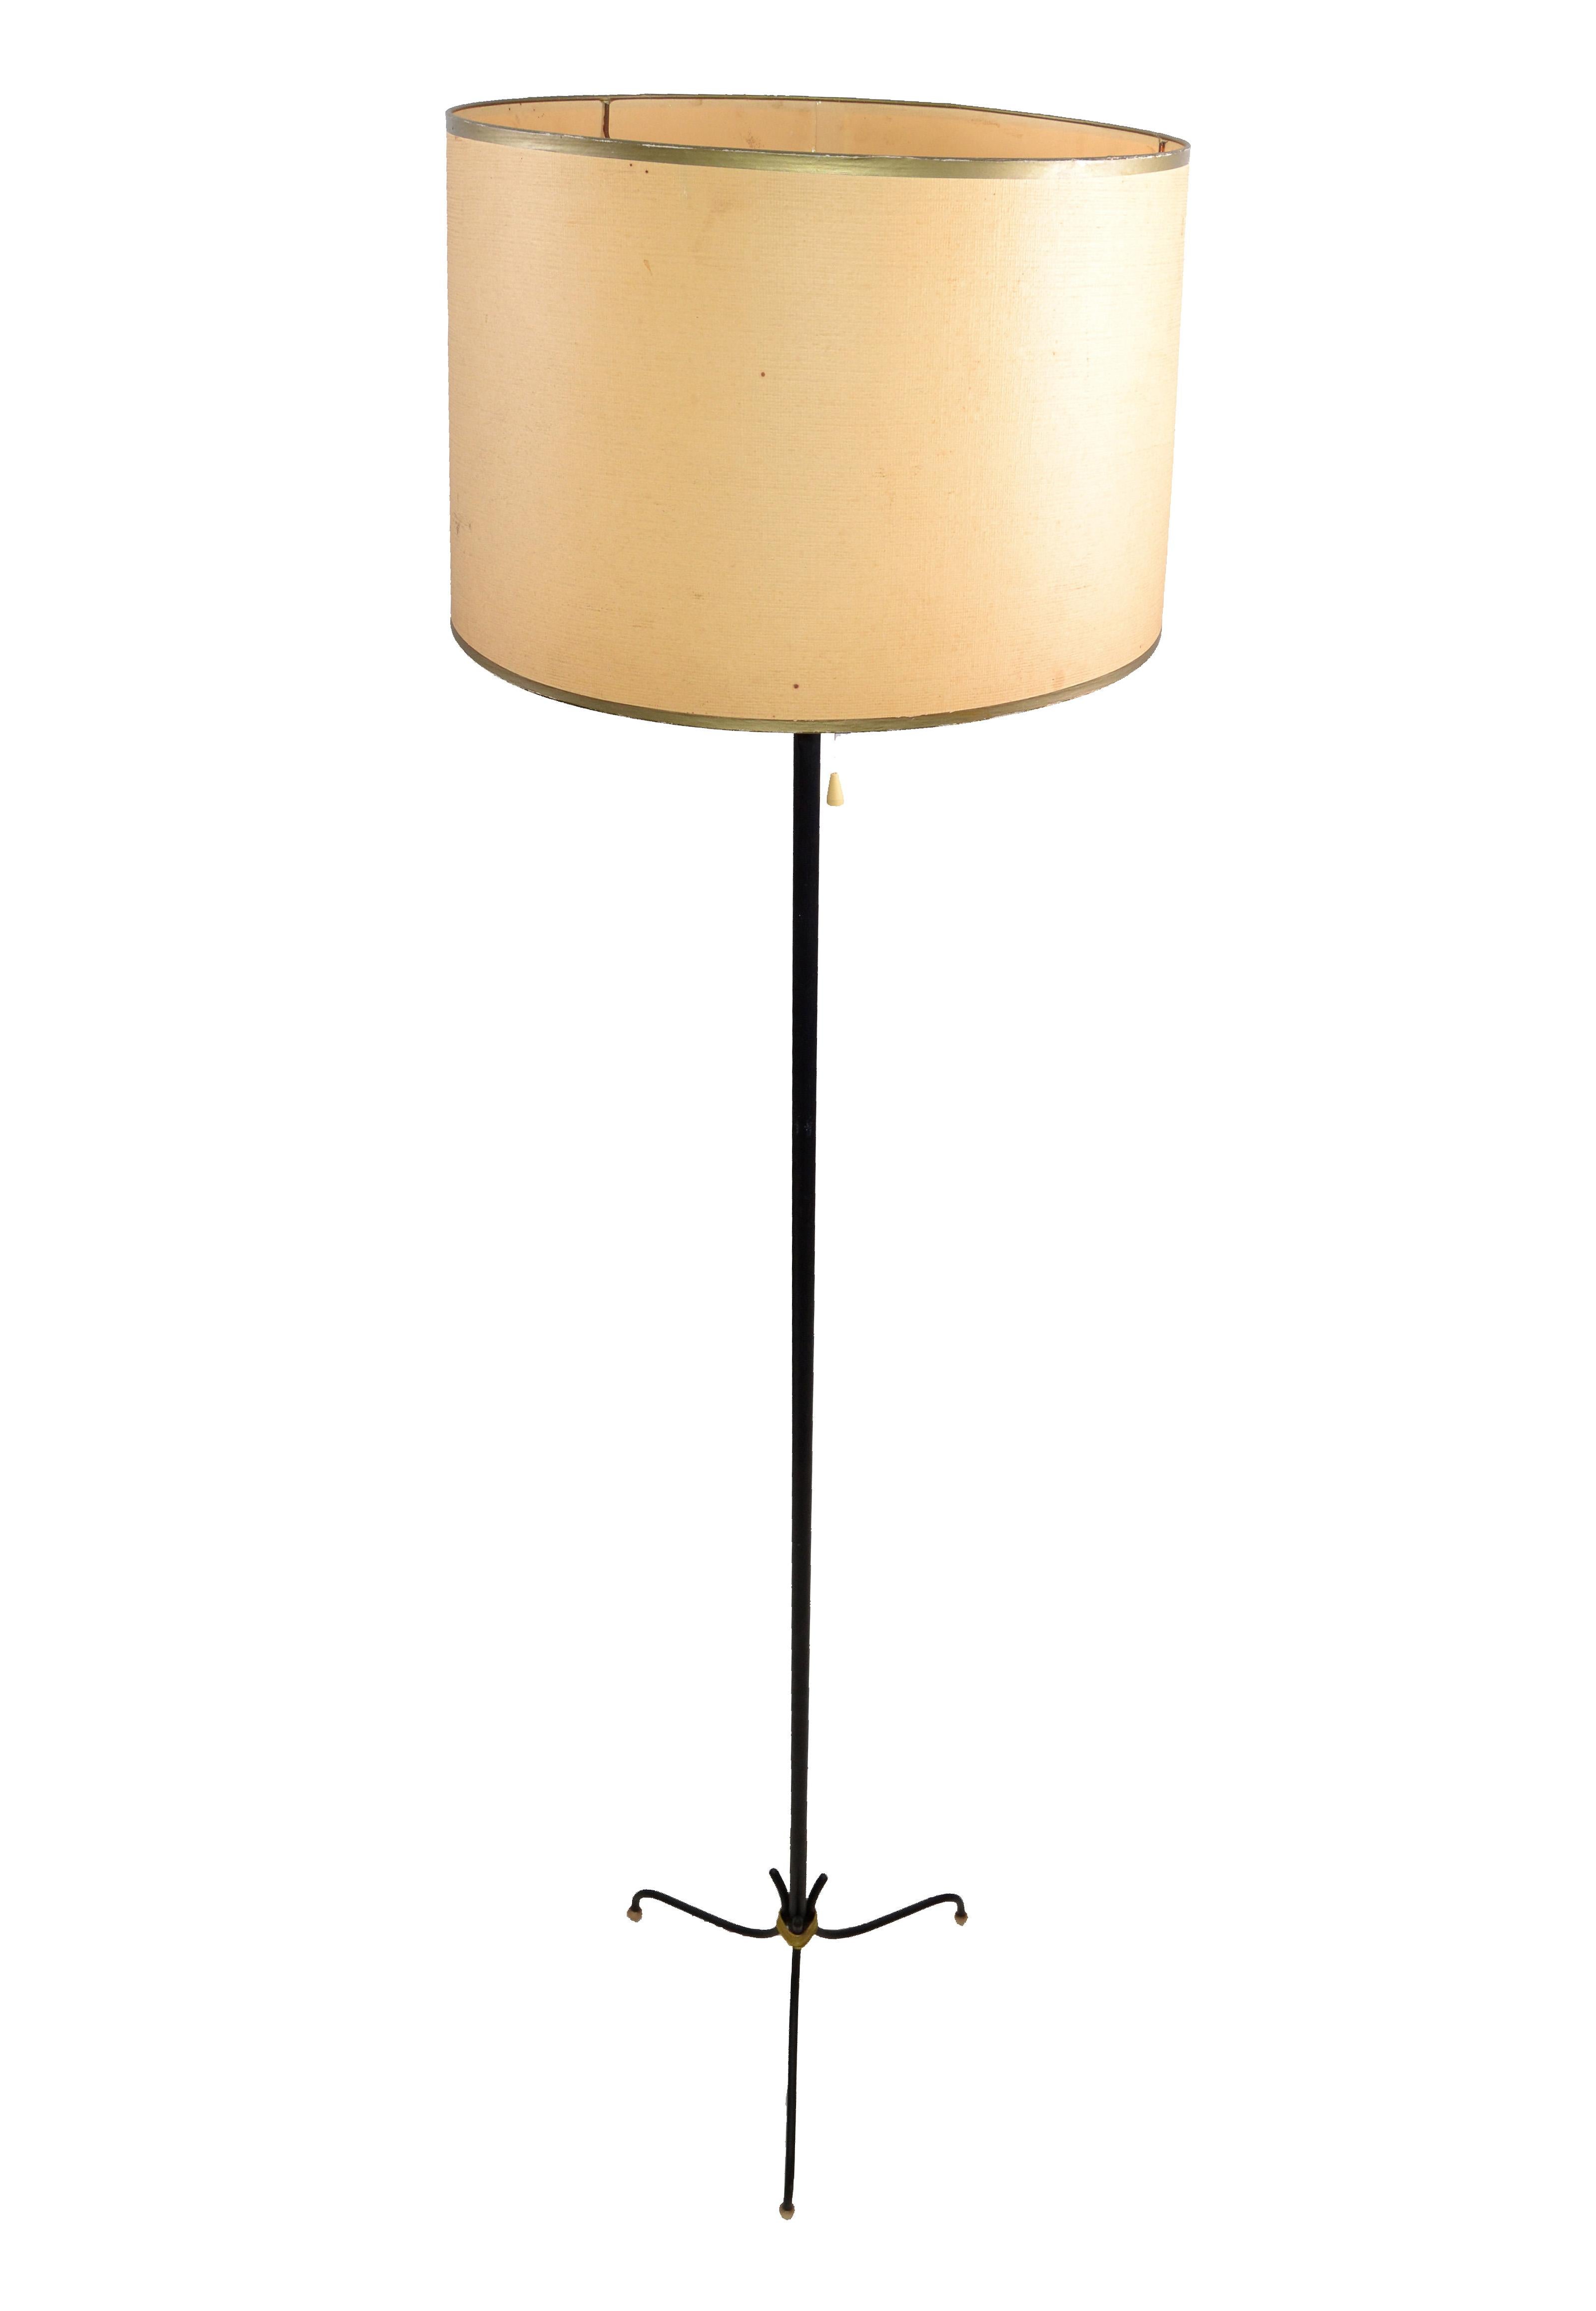 French floor lamp in the style of Pierre Guariche designed in 1960.
Wired for US and in working condition. Takes 1 bulb with max. 75 watts.
Normal wear consistent with age and use.
Original paper shade: 15.5 inches diameter, 10 inches